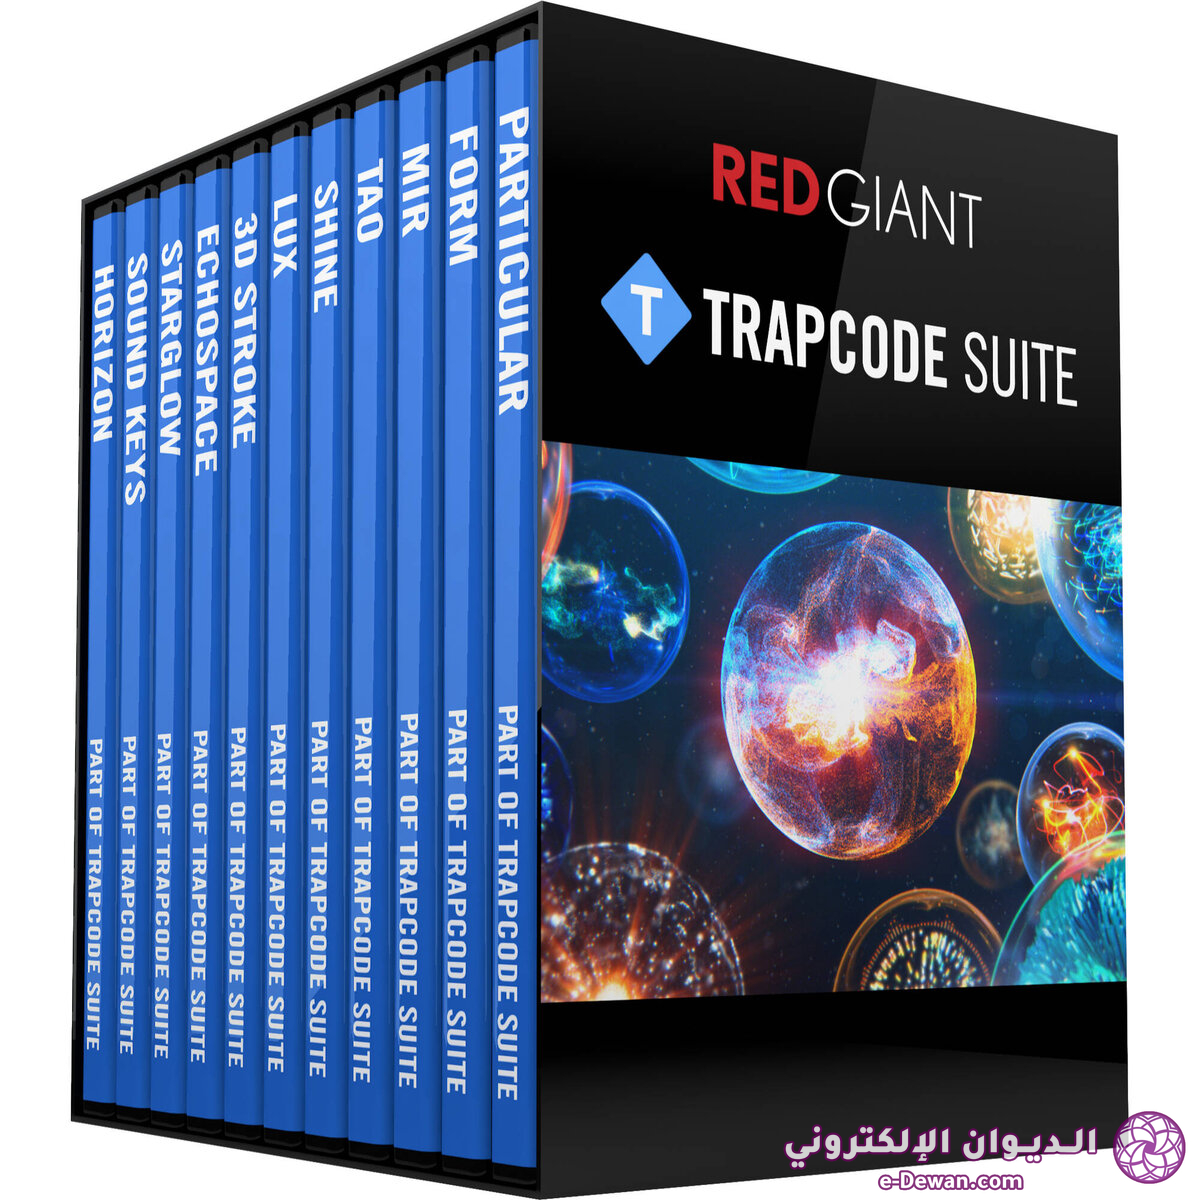 Red giant rg p tcs u2 trapcode suite 16 1625686